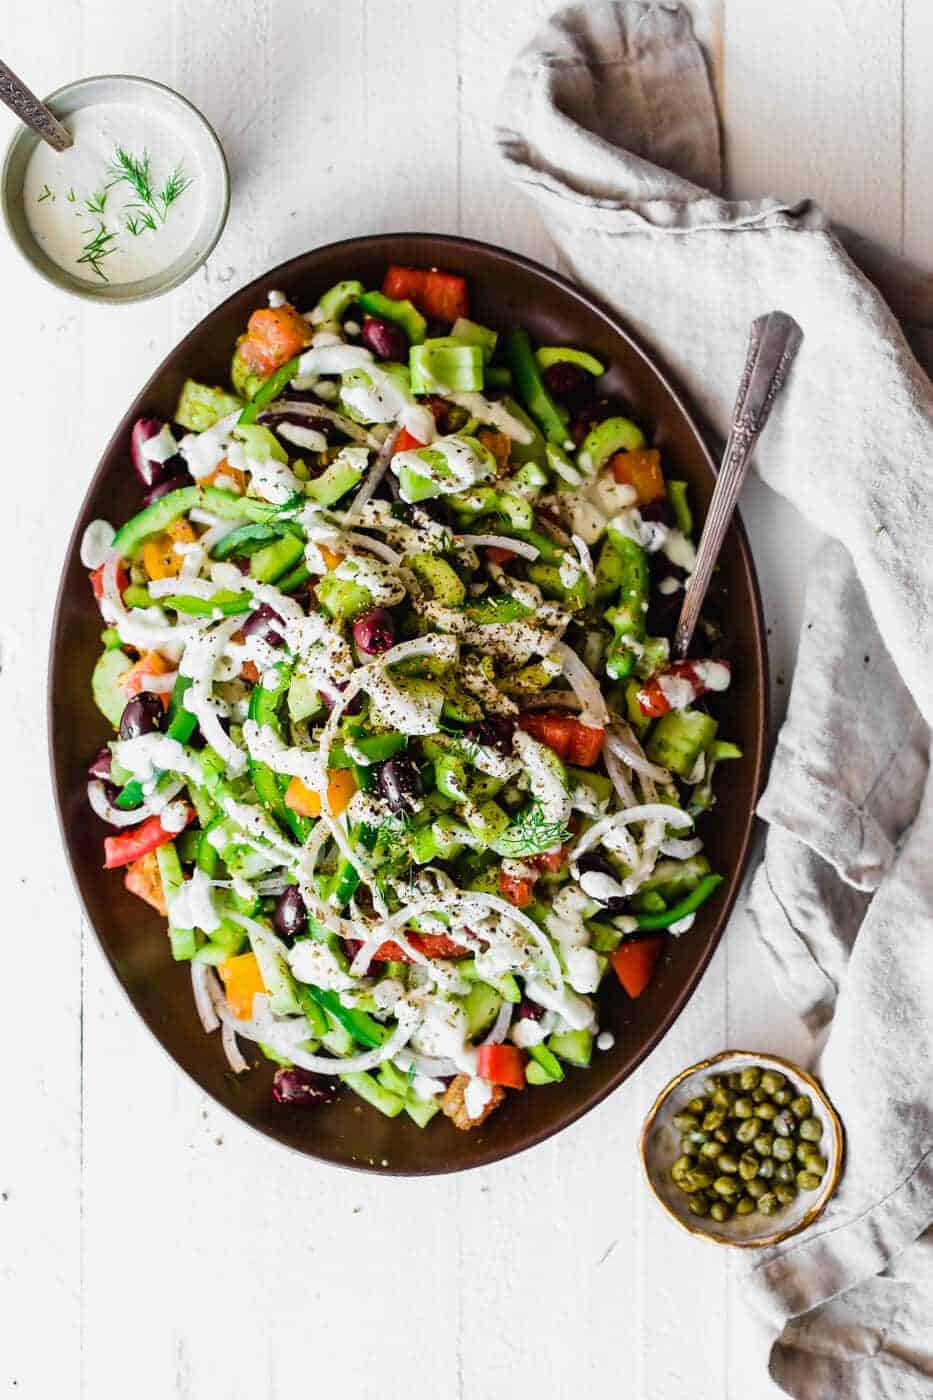 Paleo and Whole30 Greek Salad in a serving dish, drizzled with dill dressing